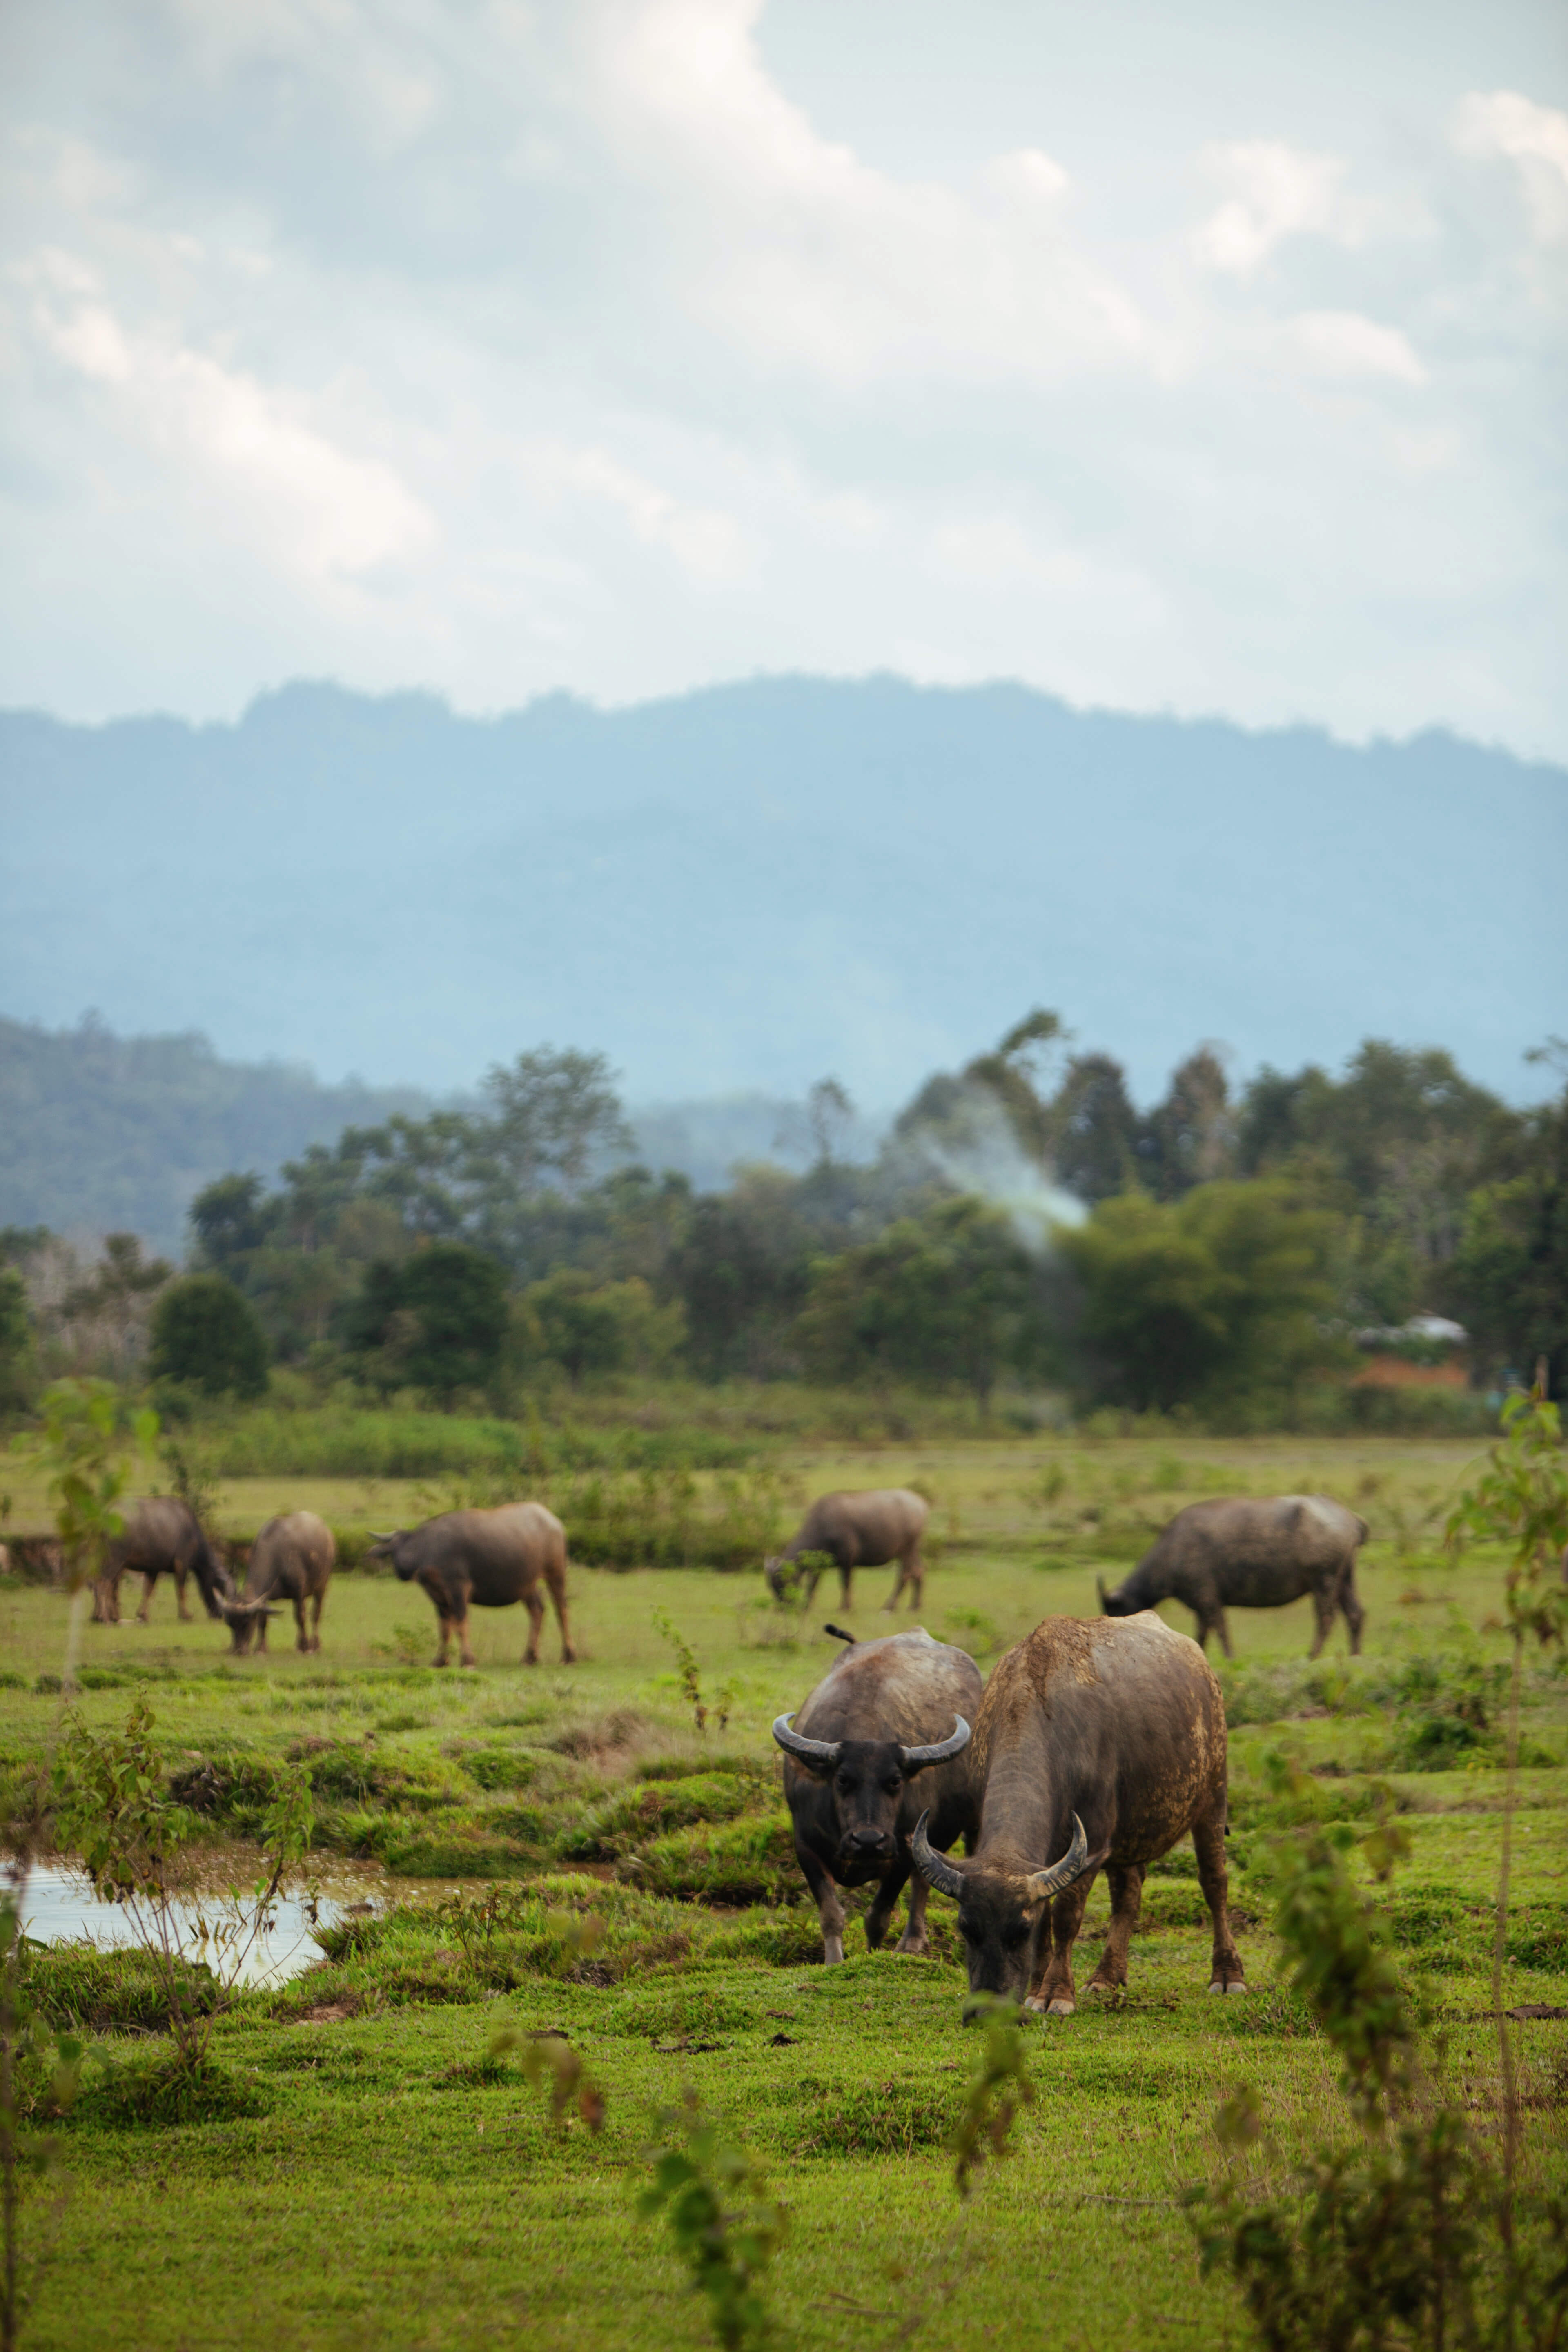 A herd of buffalo grazing in a nearby field, with mountains rising in the background. As Lilian, another one of Langit’s founders puts it: “Buffaloes have the best life in Long Semadoh. They literally just poop, eat and siesta!” Buffalo poop is also an important fertiliser for Langit’s farmers, who have weaned off using chemical pesticides and fertilisers.